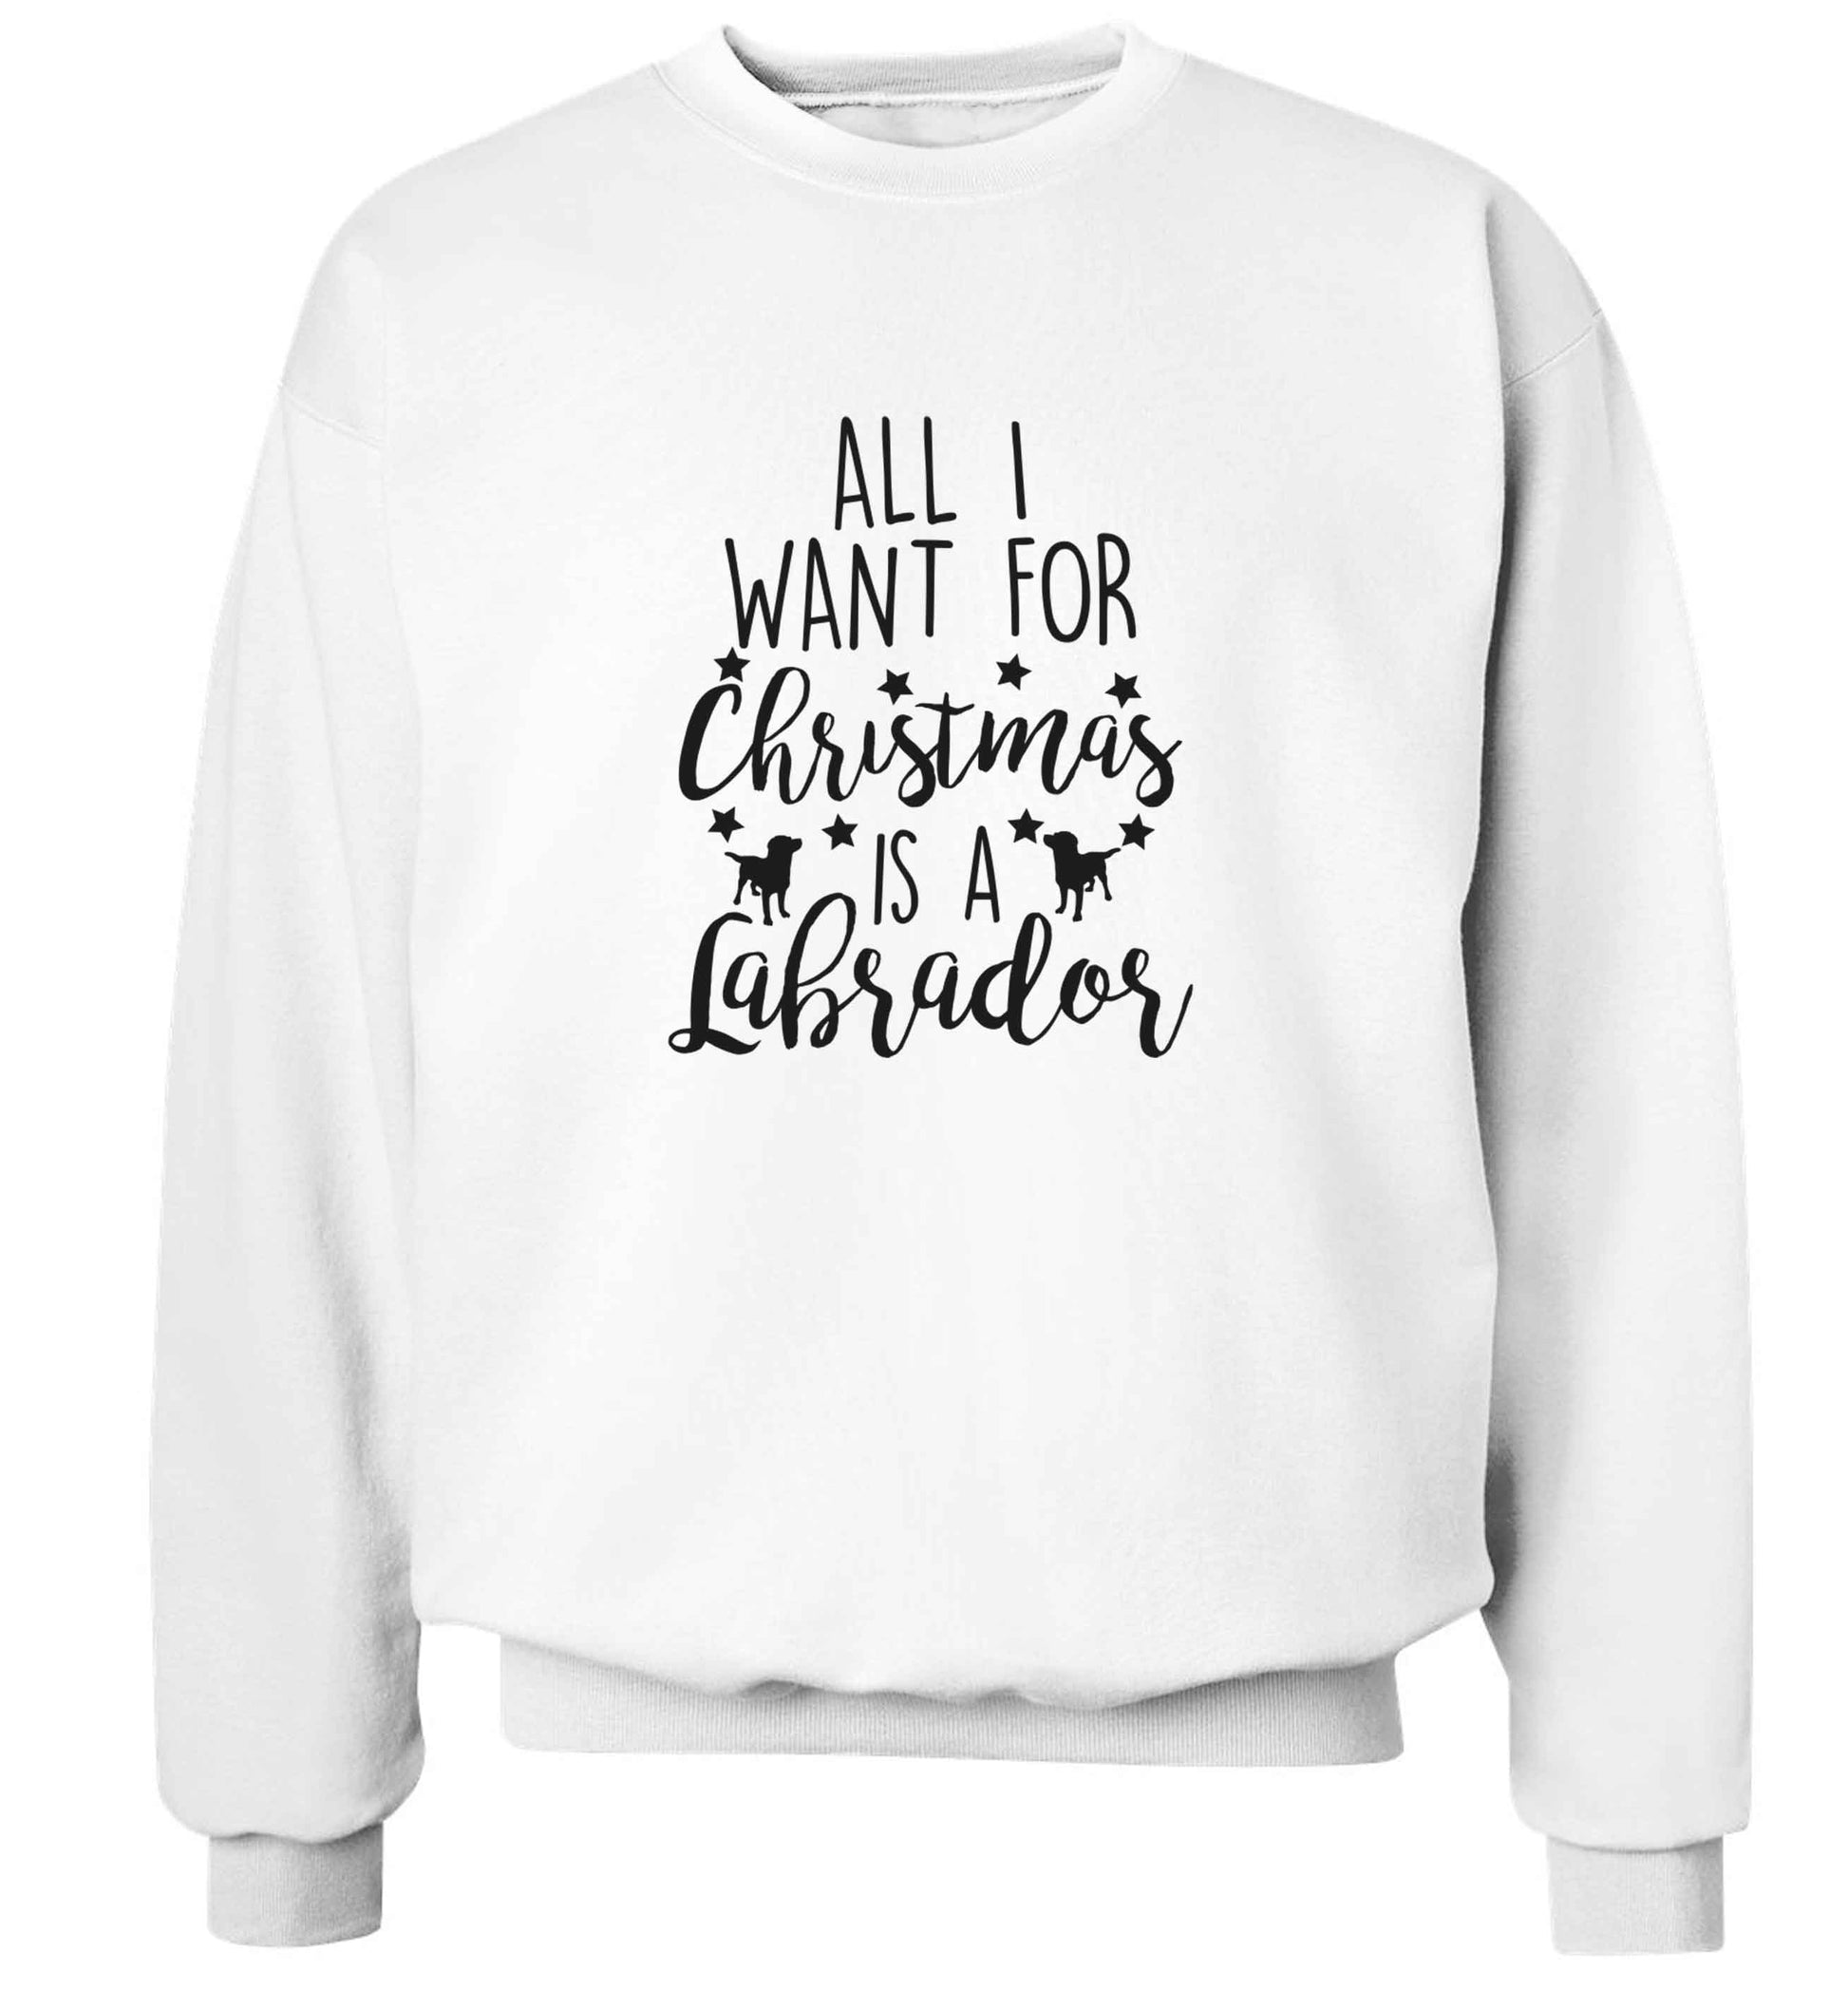 All I want for Christmas is a labrador adult's unisex white sweater 2XL